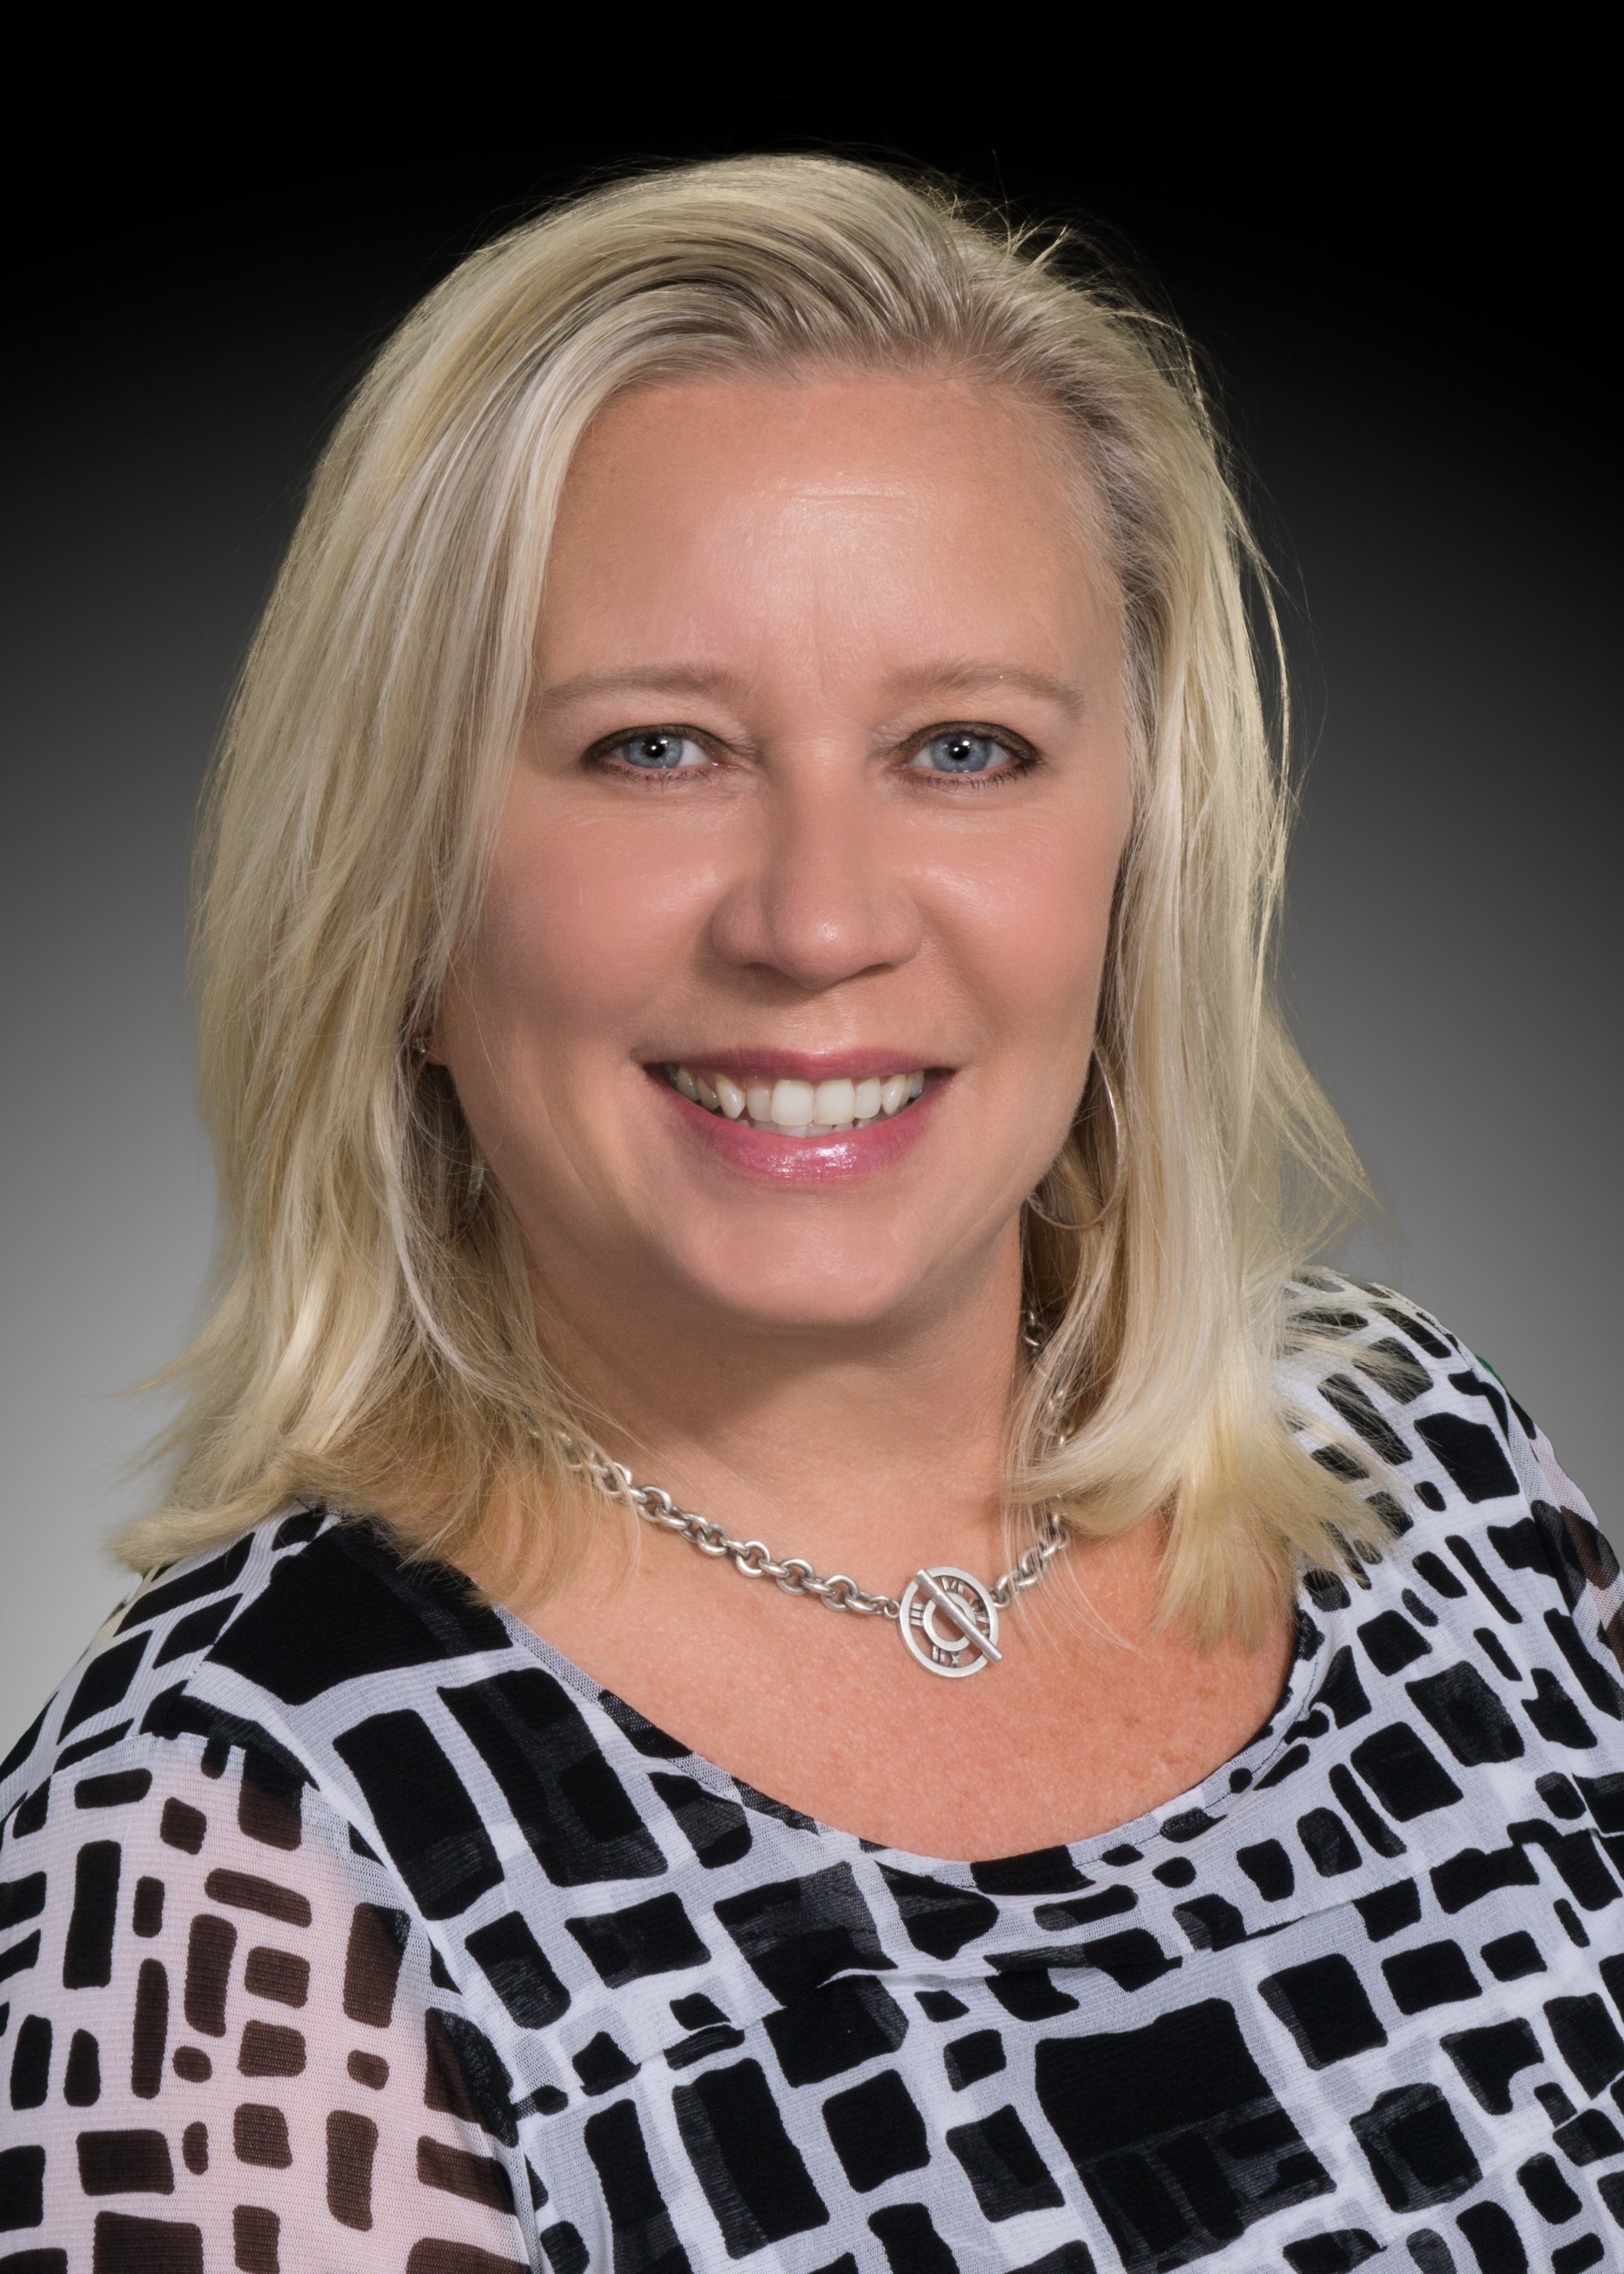 Cascade Sotheby's International Realty taps expert new home broker, Michelle Gregg, as exclusive listing agent for all Franklin Brothers homes.